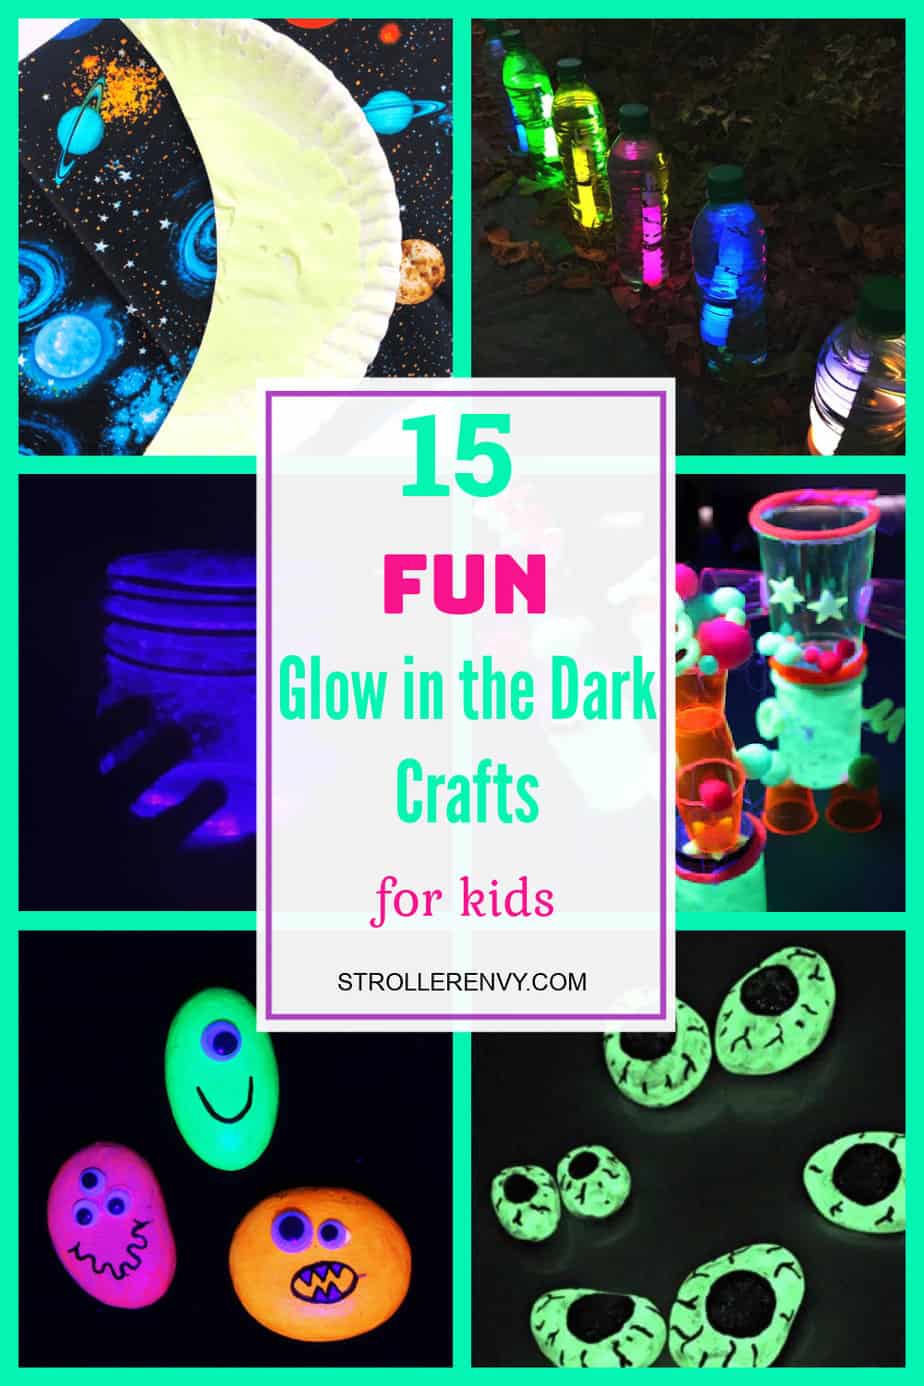 Glow in the Dark Crafts for Kids 